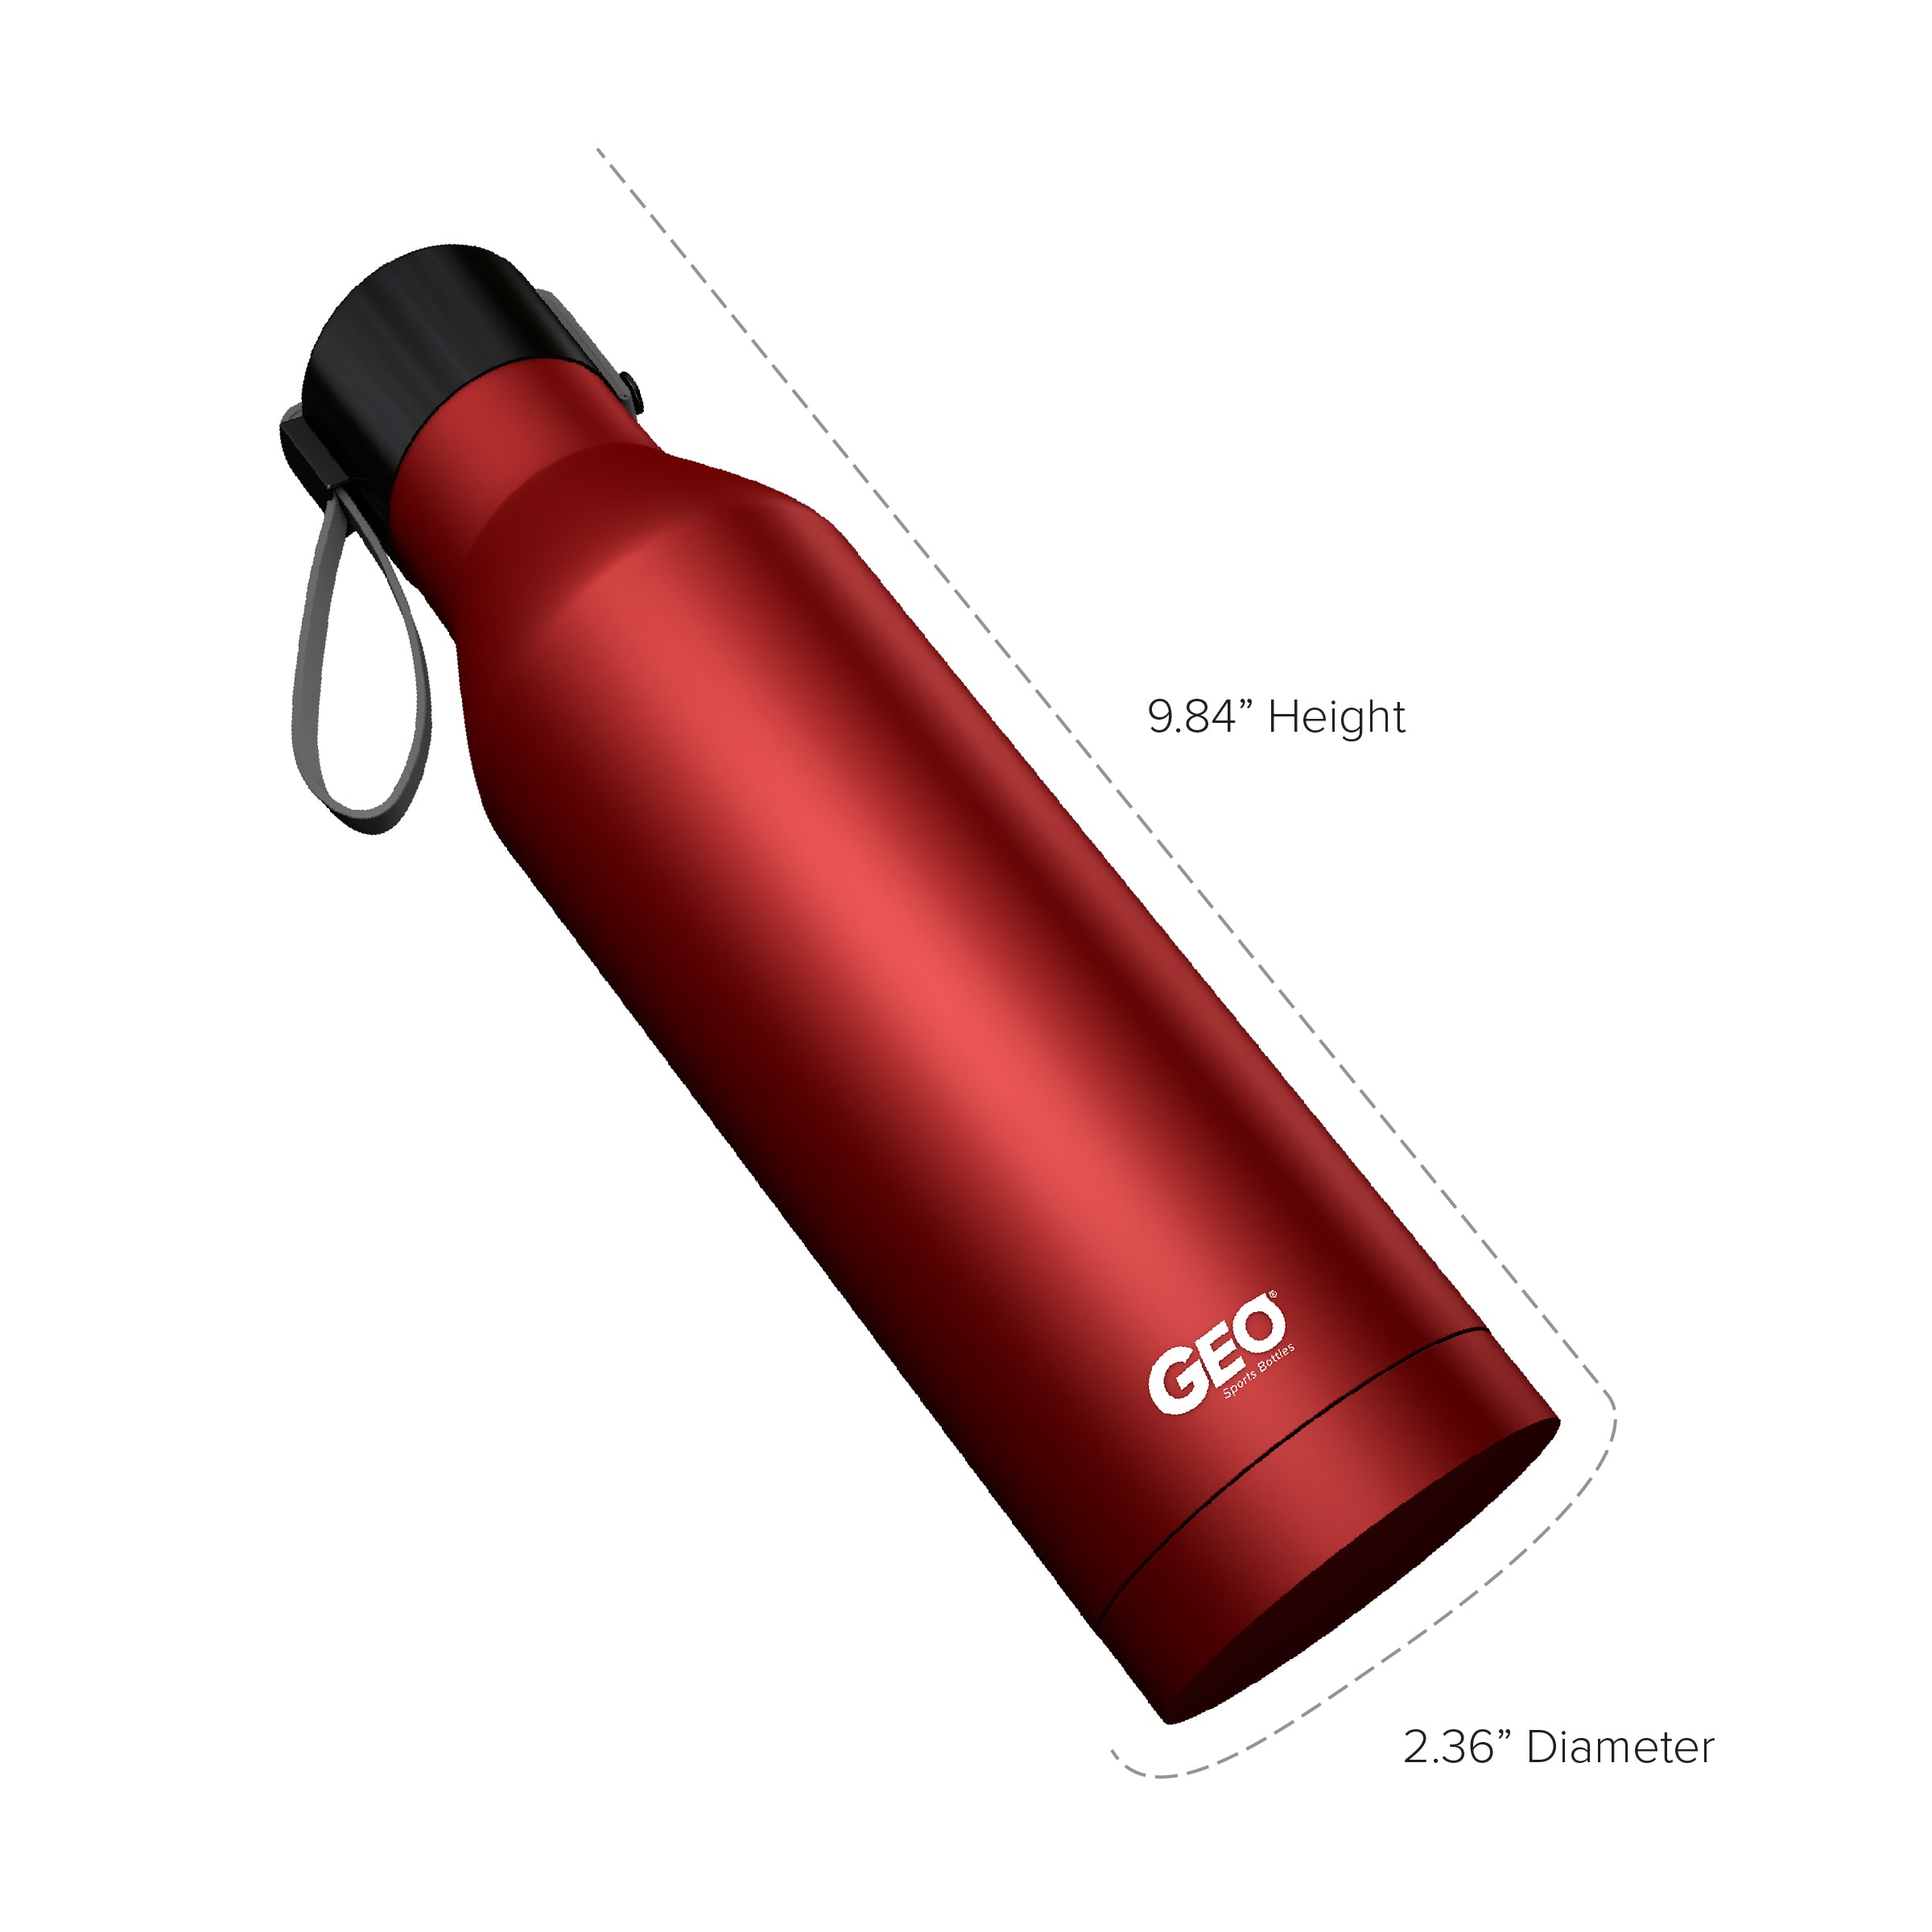 Stainless Steel Sublimation Sport Water Bottle with Slanted Handle